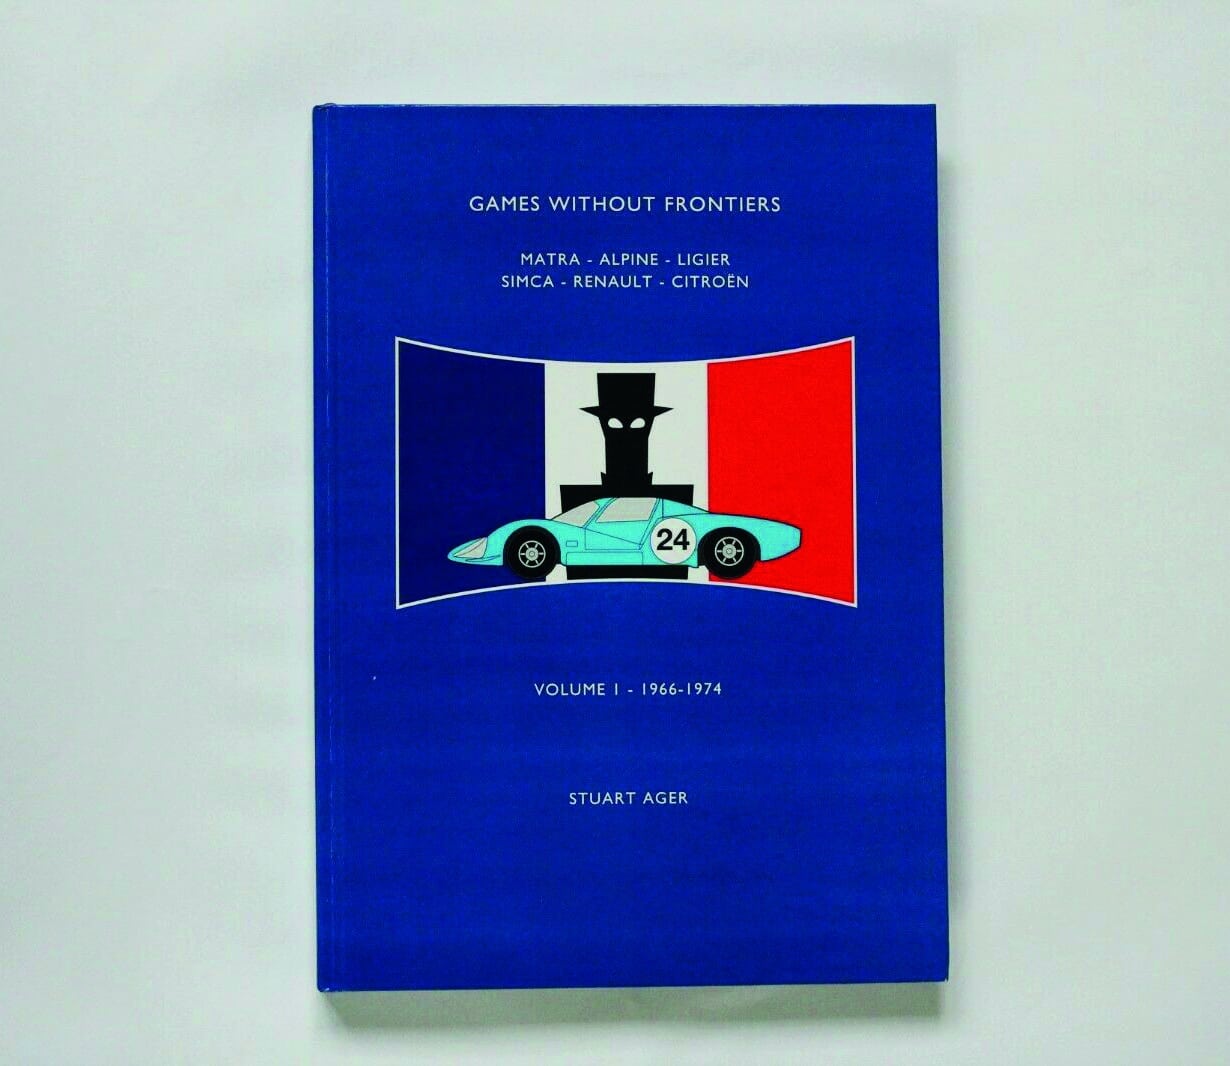 Games without Frontiers book